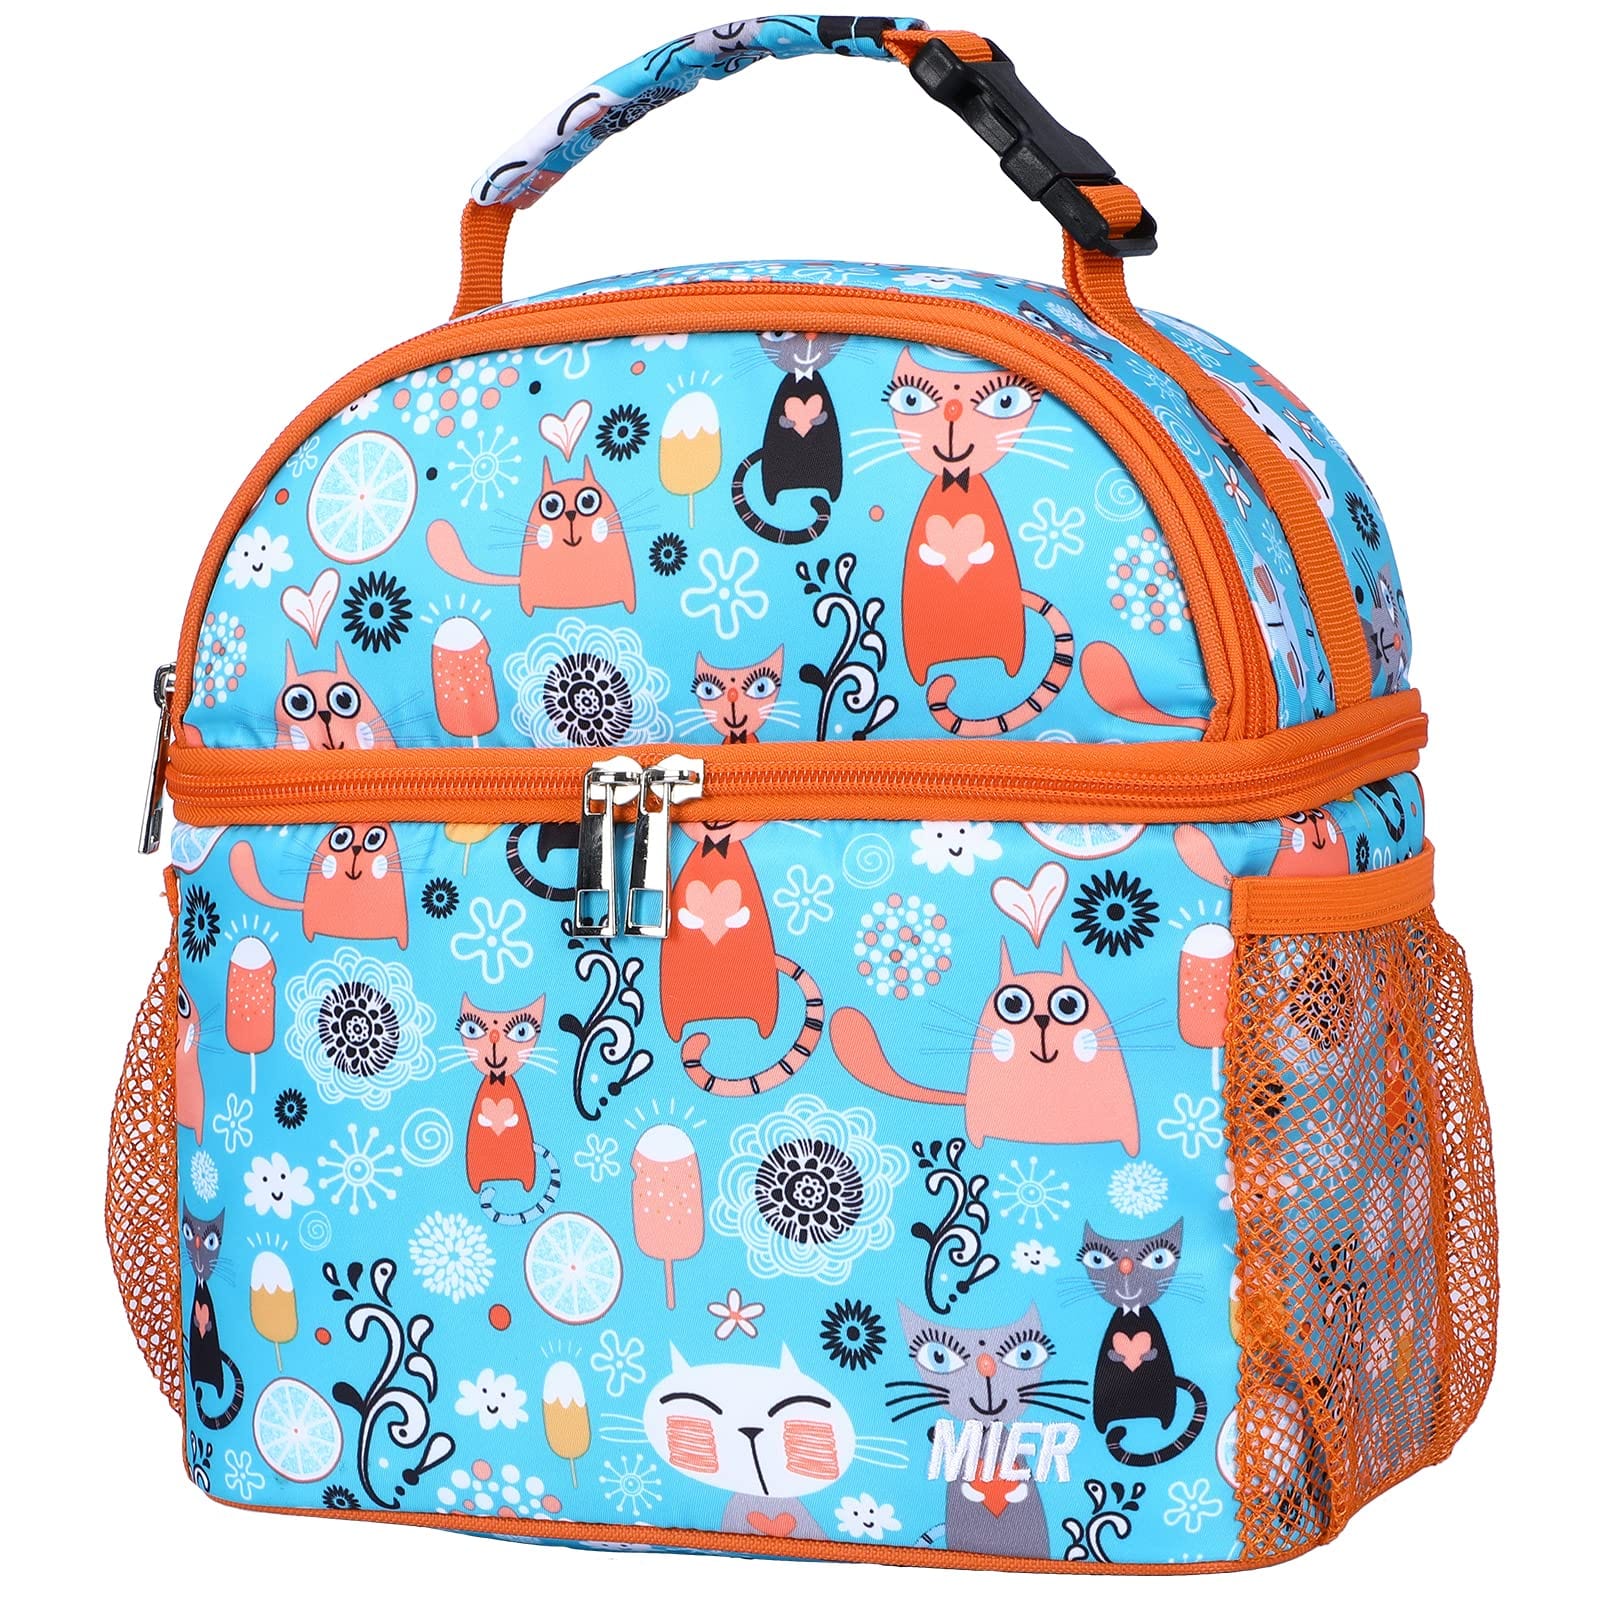 Kids Lunch Bag Insulated Toddlers Lunch Cooler Tote Lunch Bag Blue Orange Cat MIER